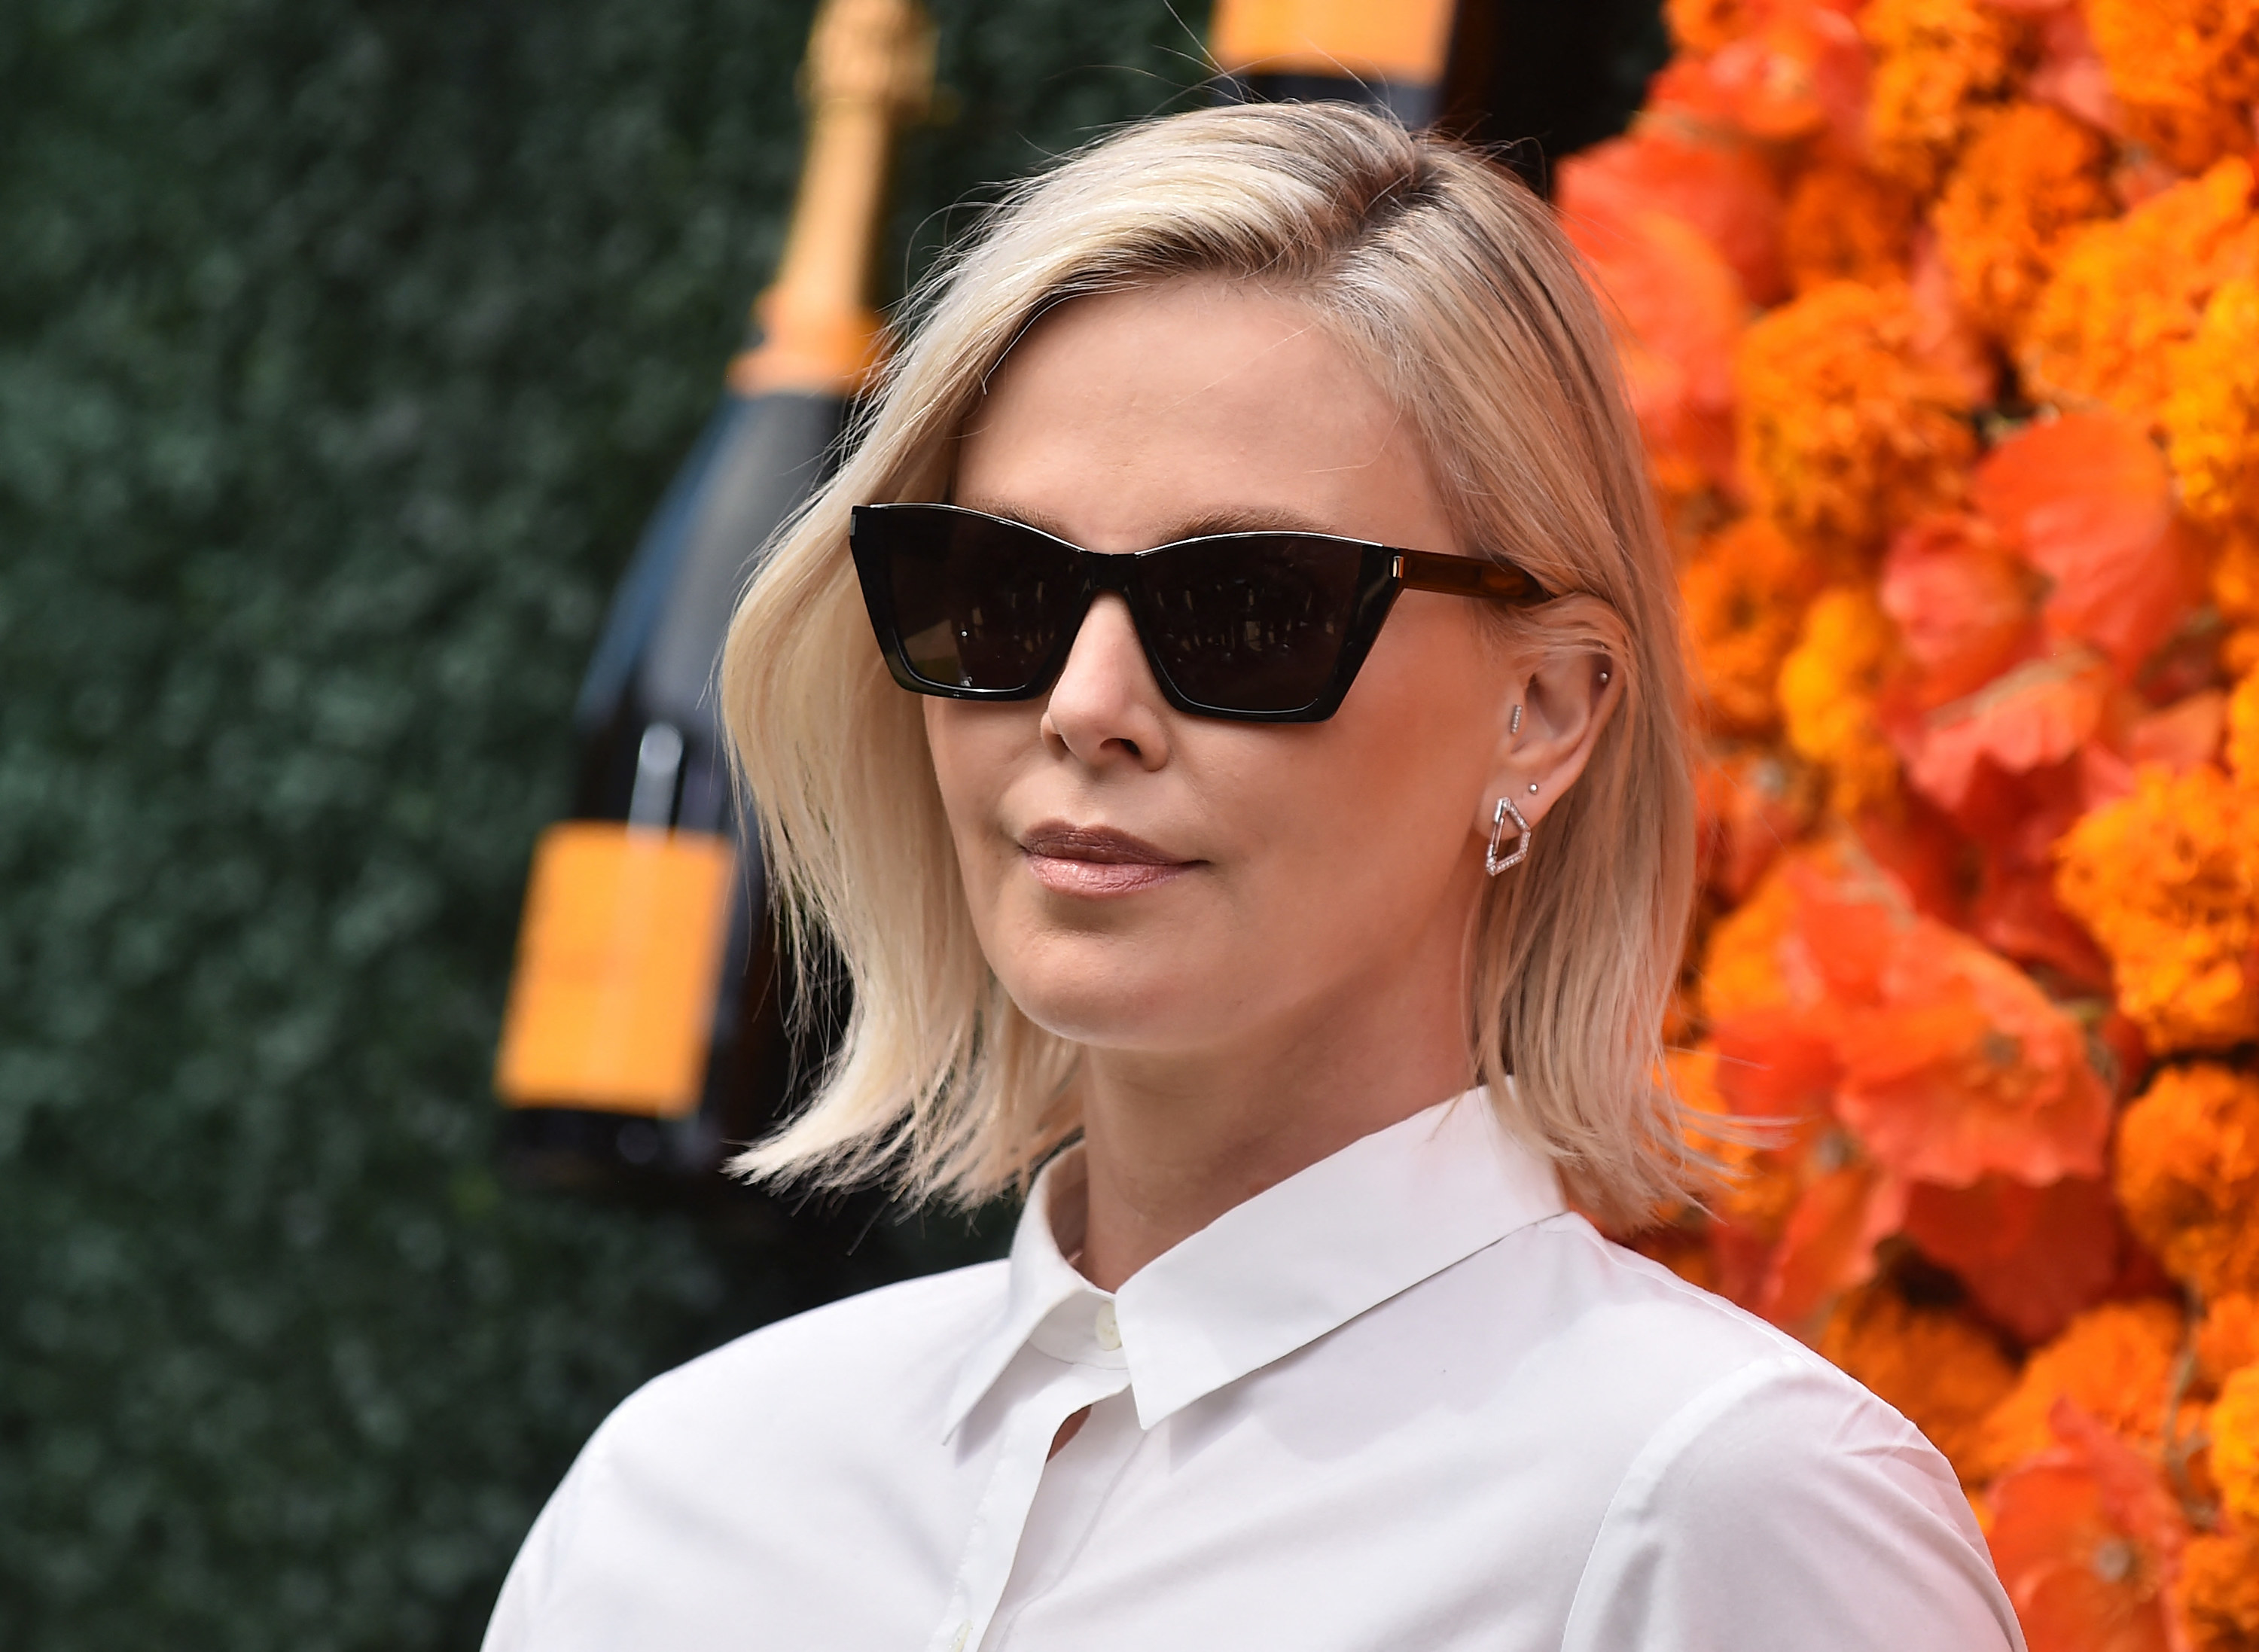 Charlize Theron wearing sunglasses with a straight face